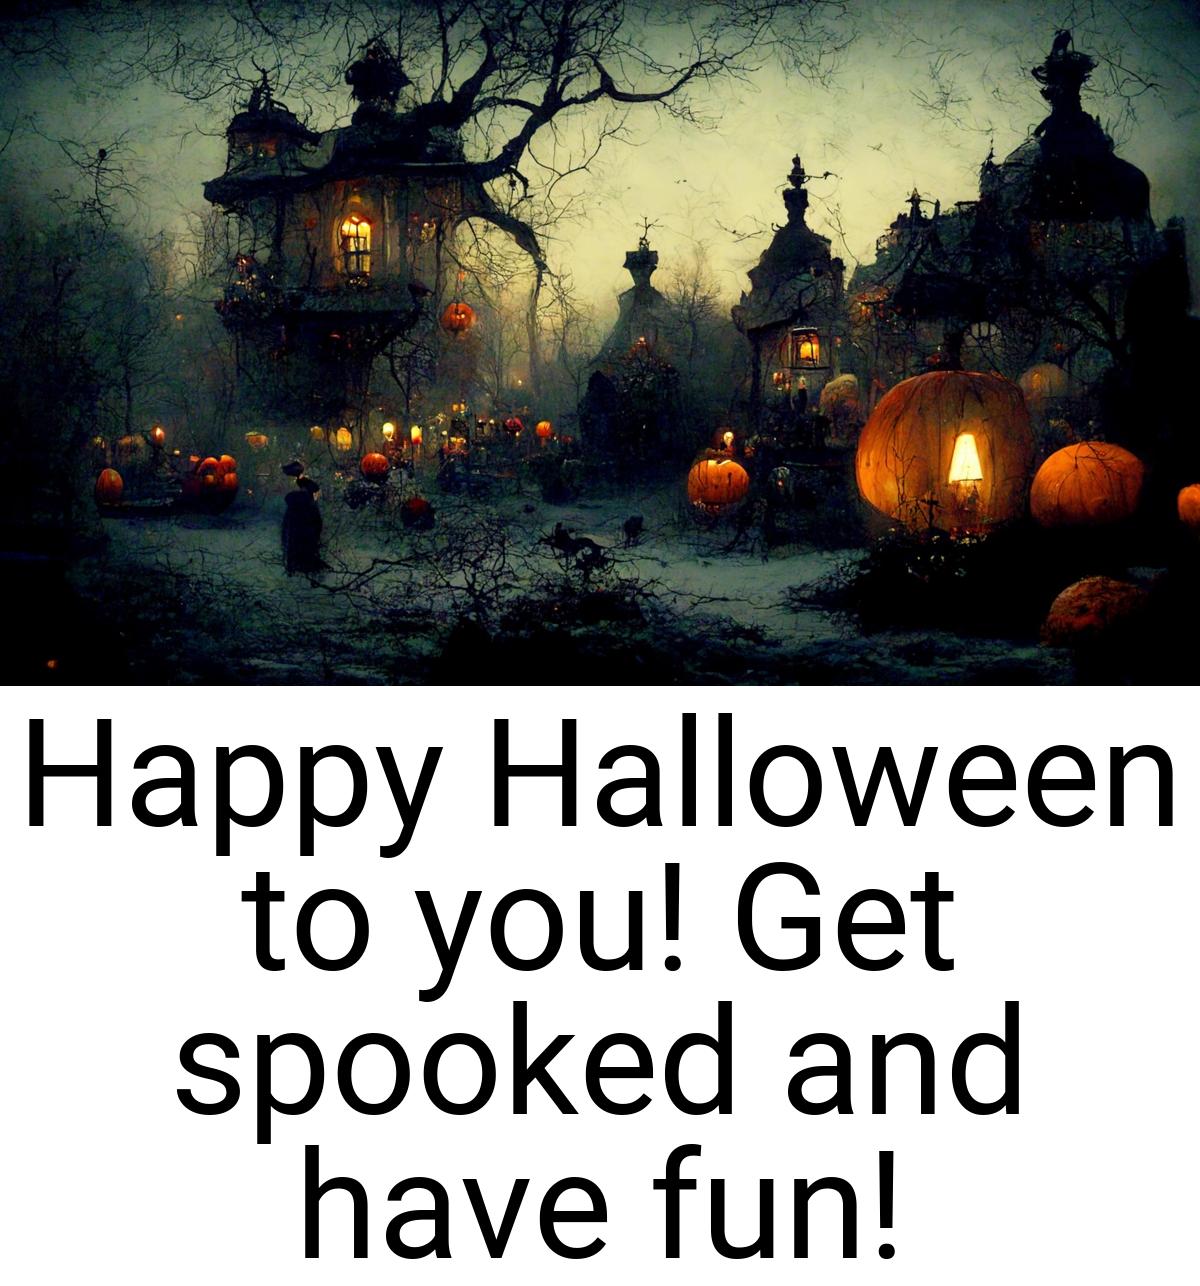 Happy Halloween to you! Get spooked and have fun